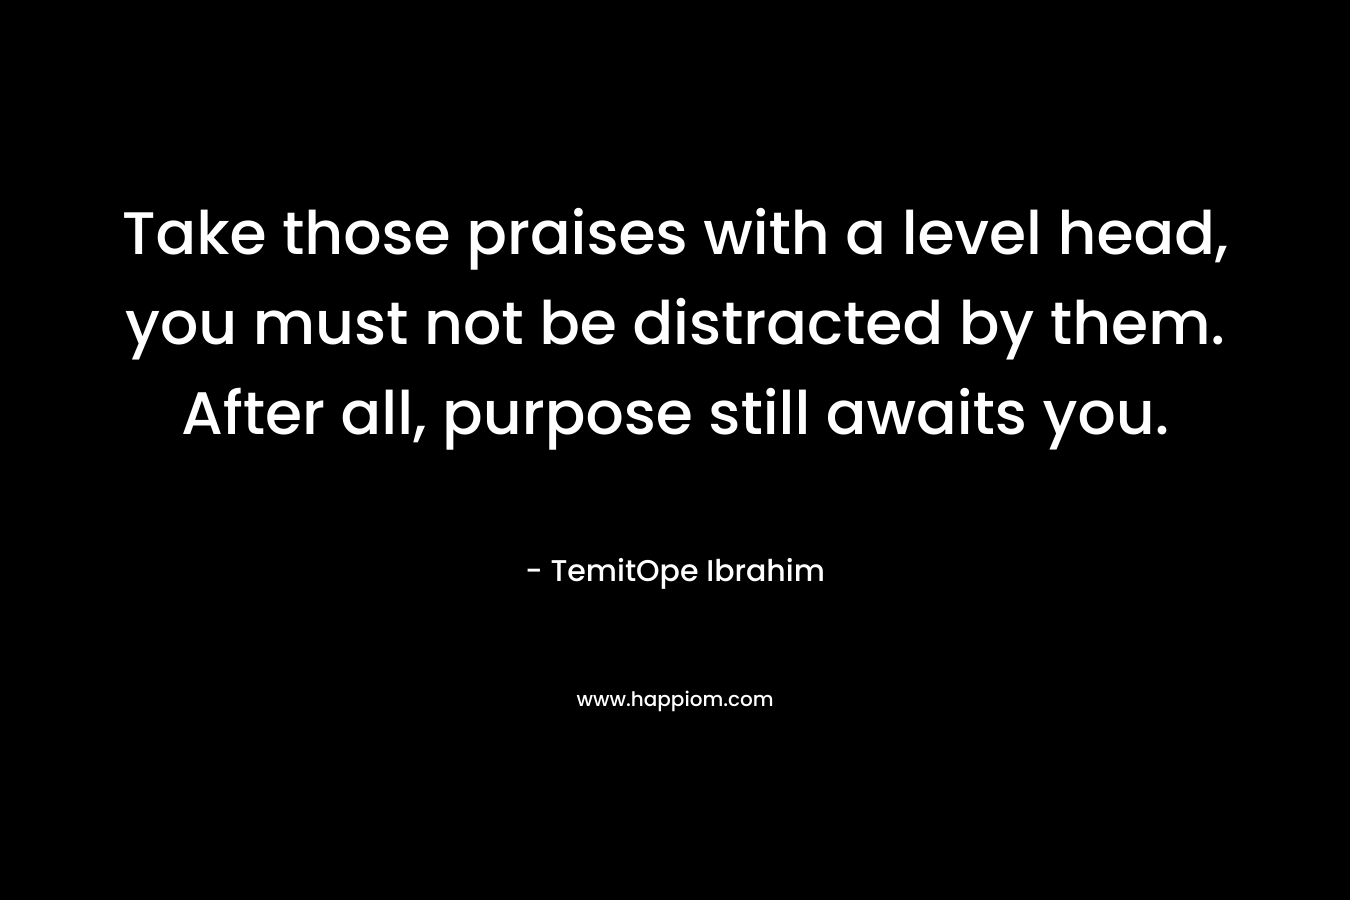 Take those praises with a level head, you must not be distracted by them. After all, purpose still awaits you.